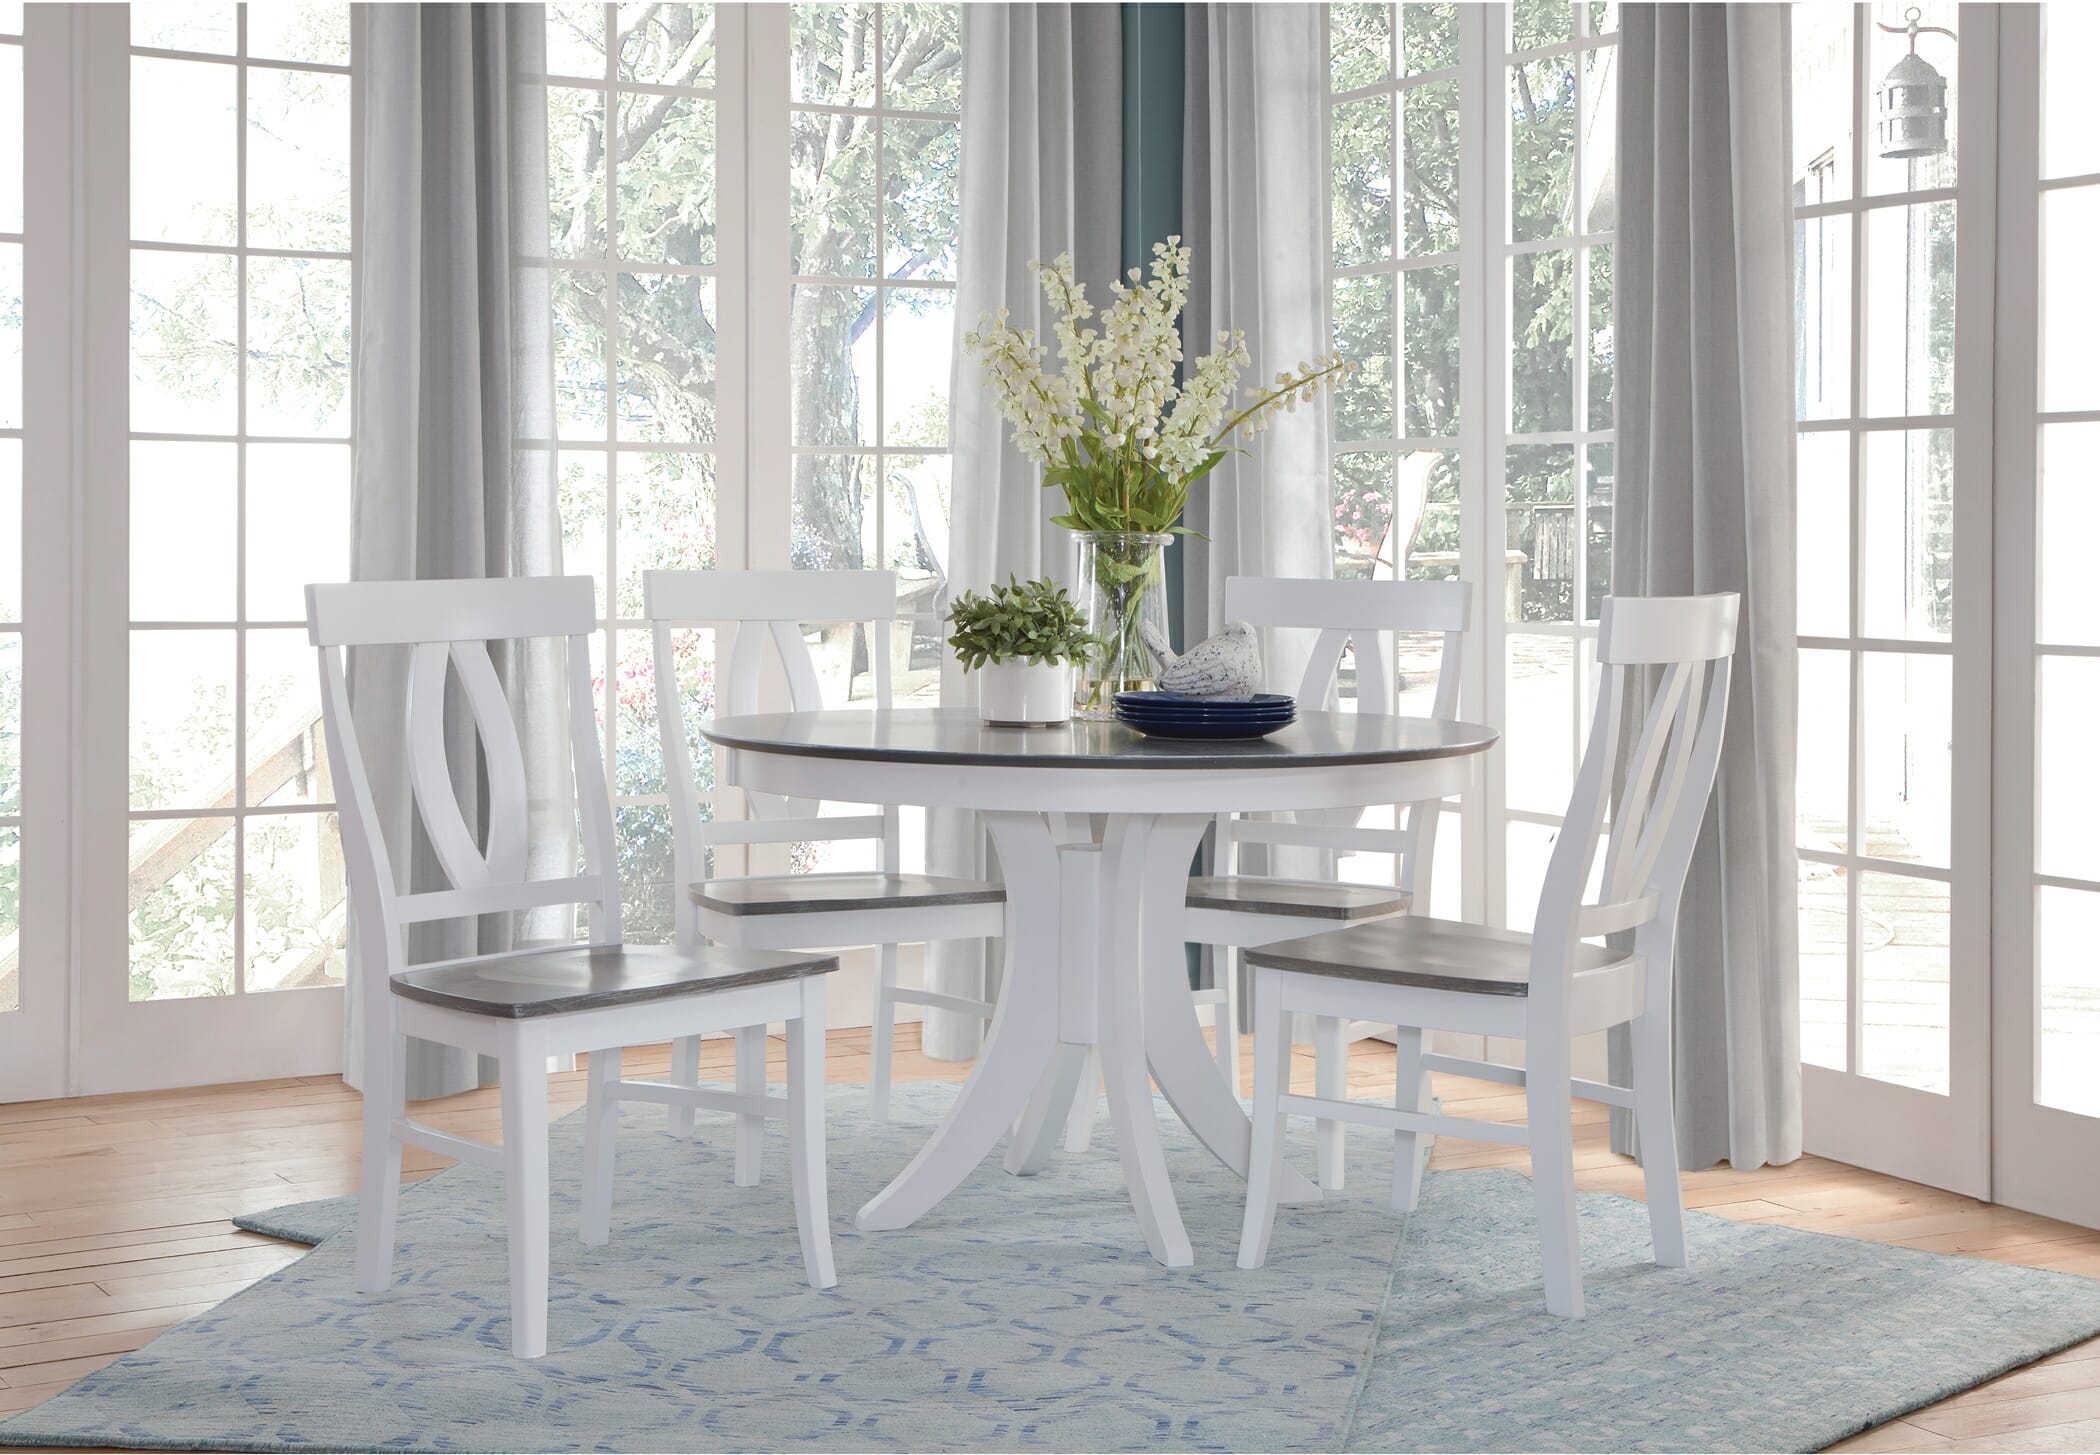 Ww59 Grey And White Round 5 Piece Set, White Circular Kitchen Table And Chairs